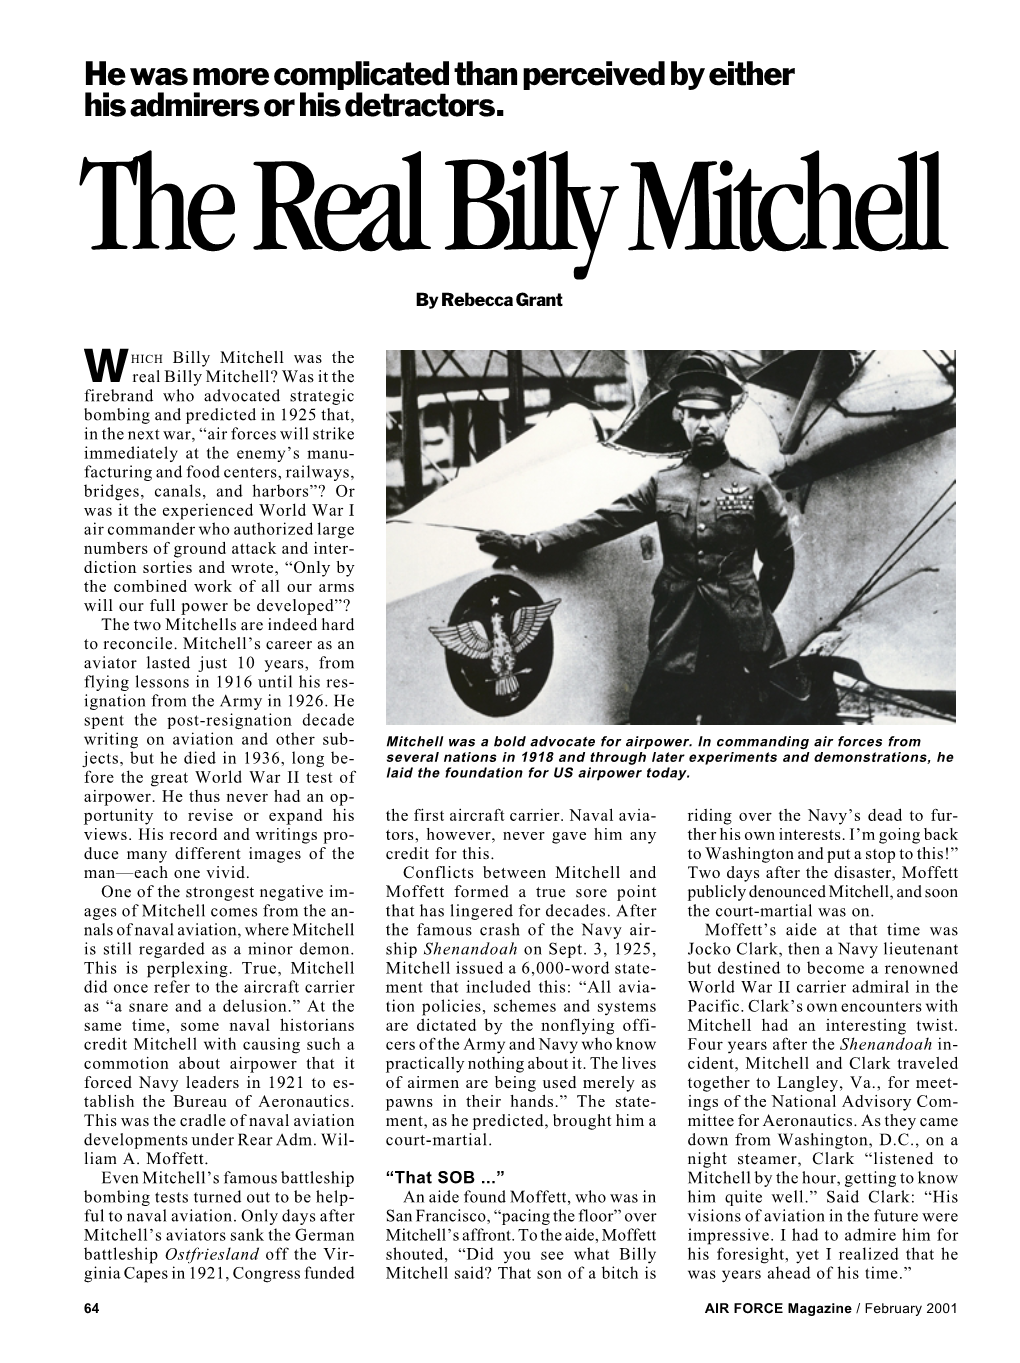 The Real Billy Mitchell by Rebecca Grant